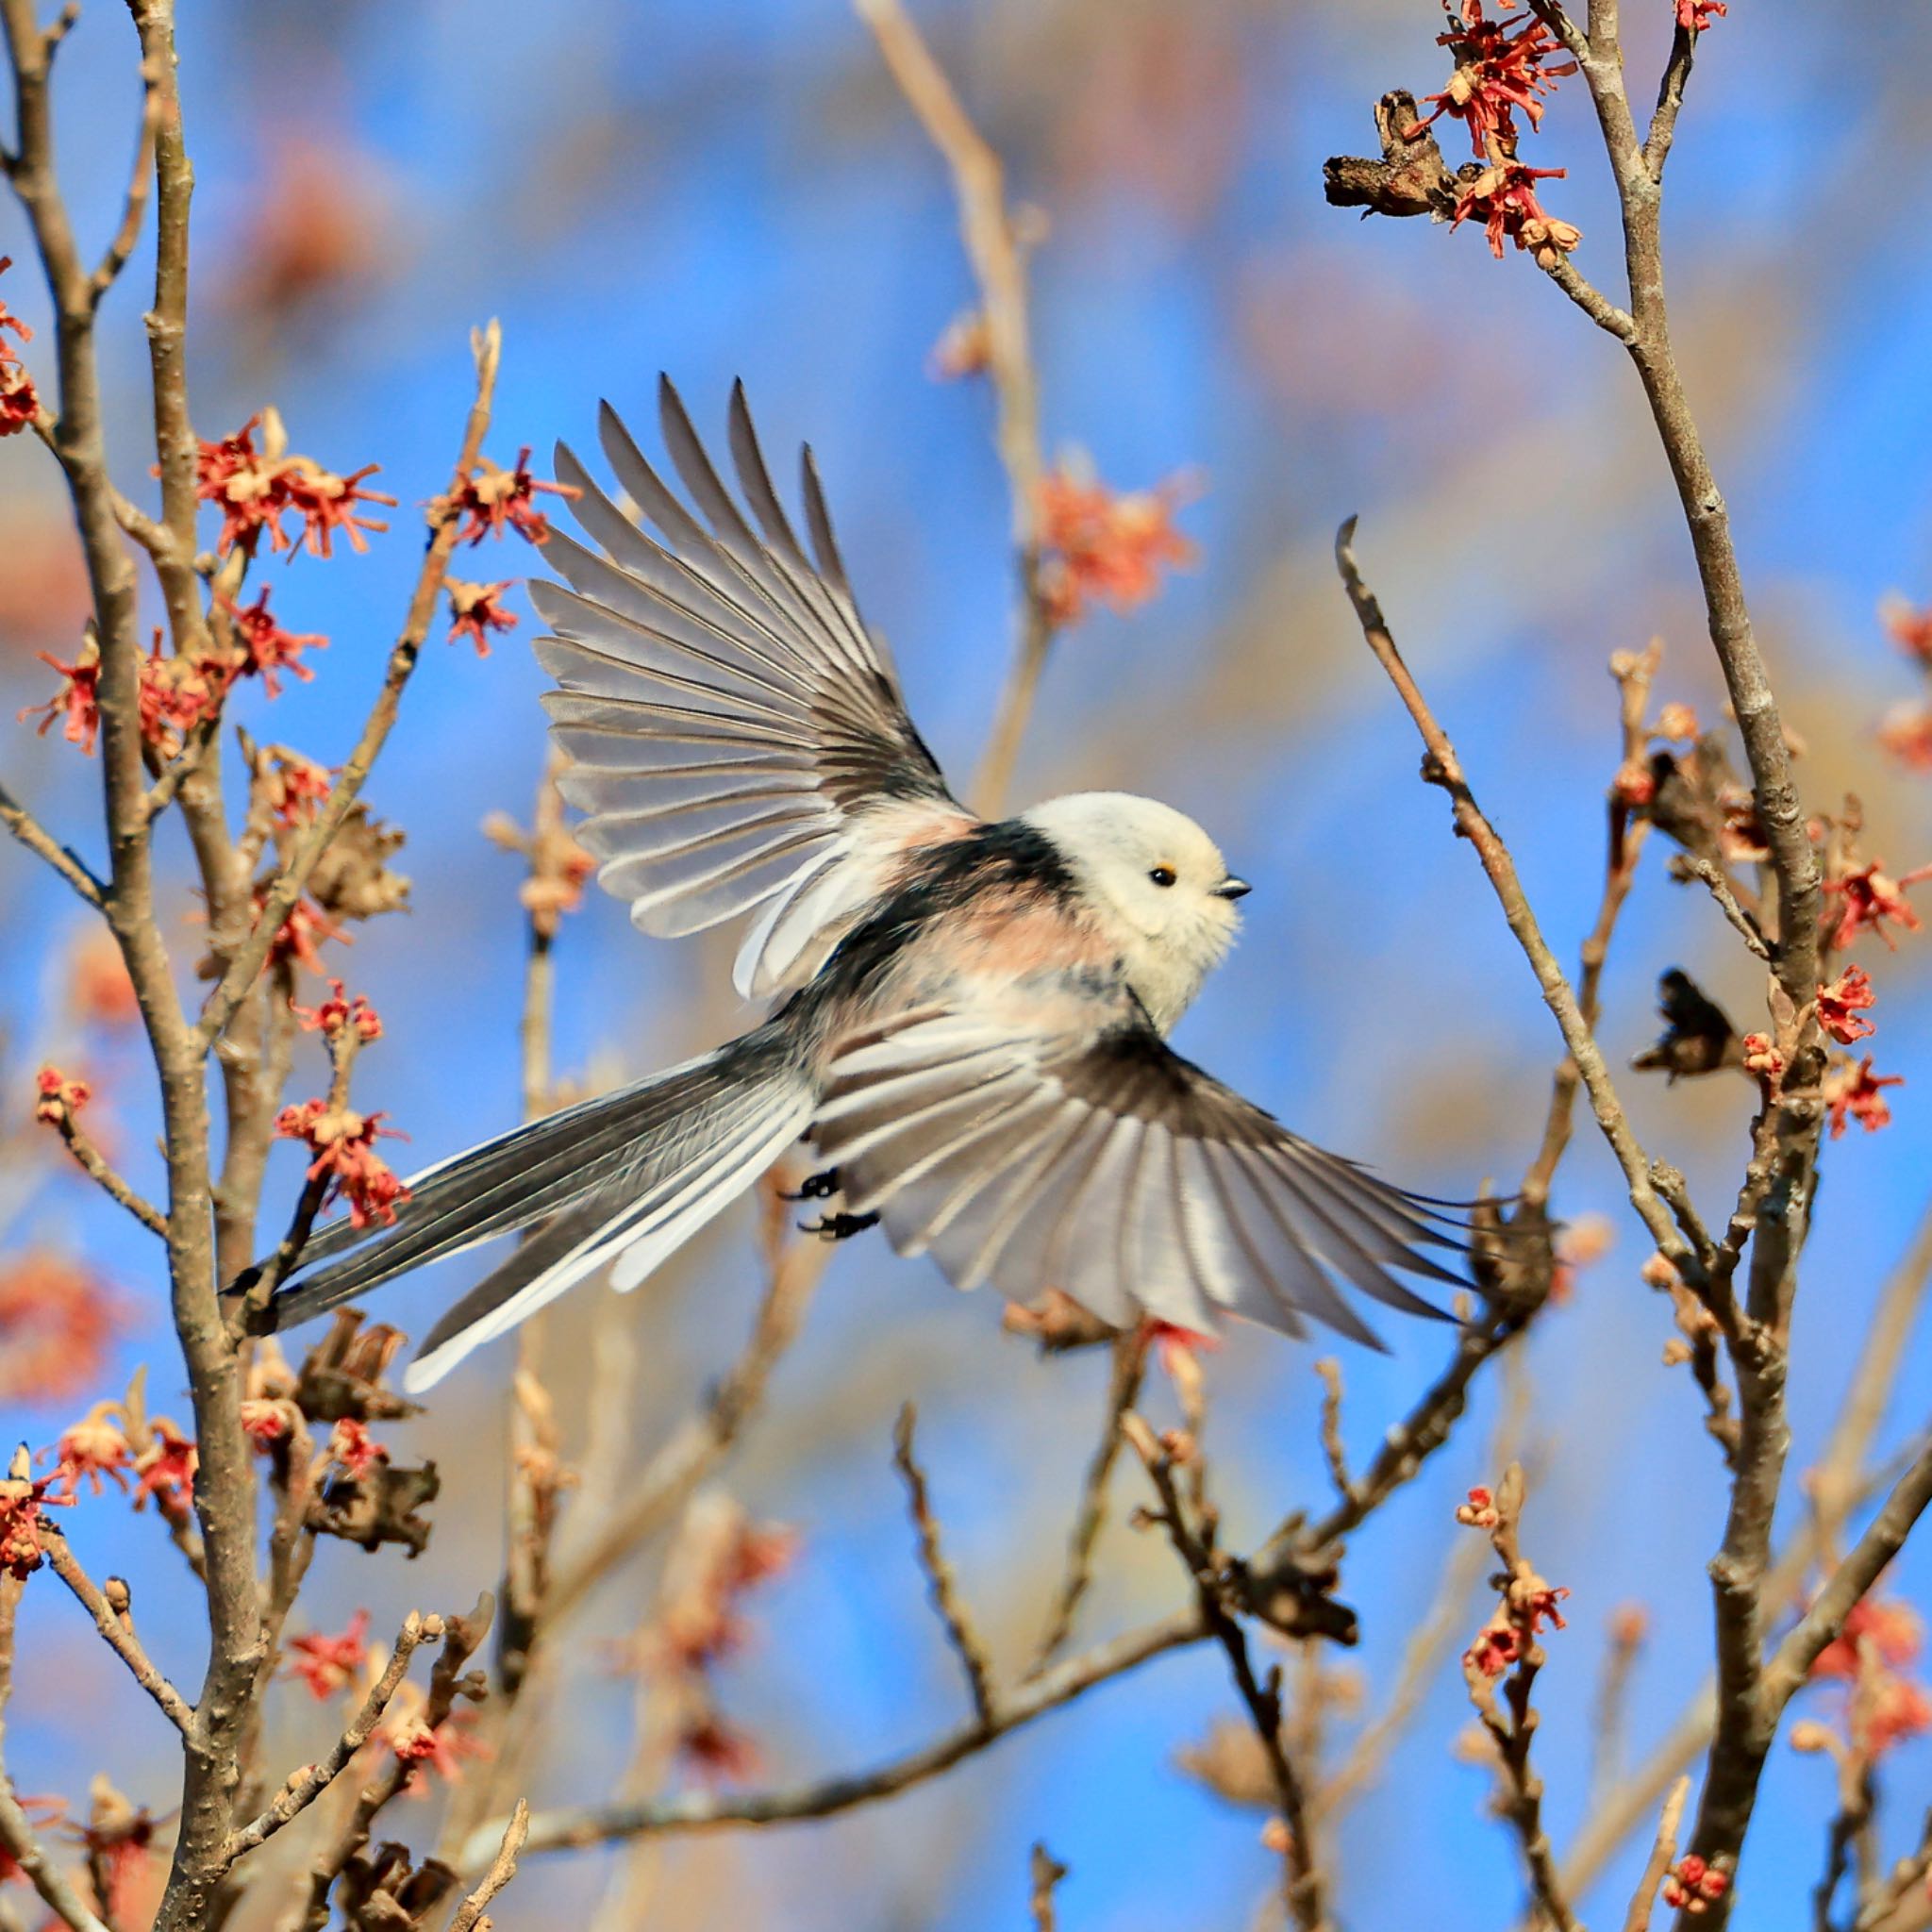 Photo of Long-tailed tit(japonicus) at 宮城県 by ハゲマシコ